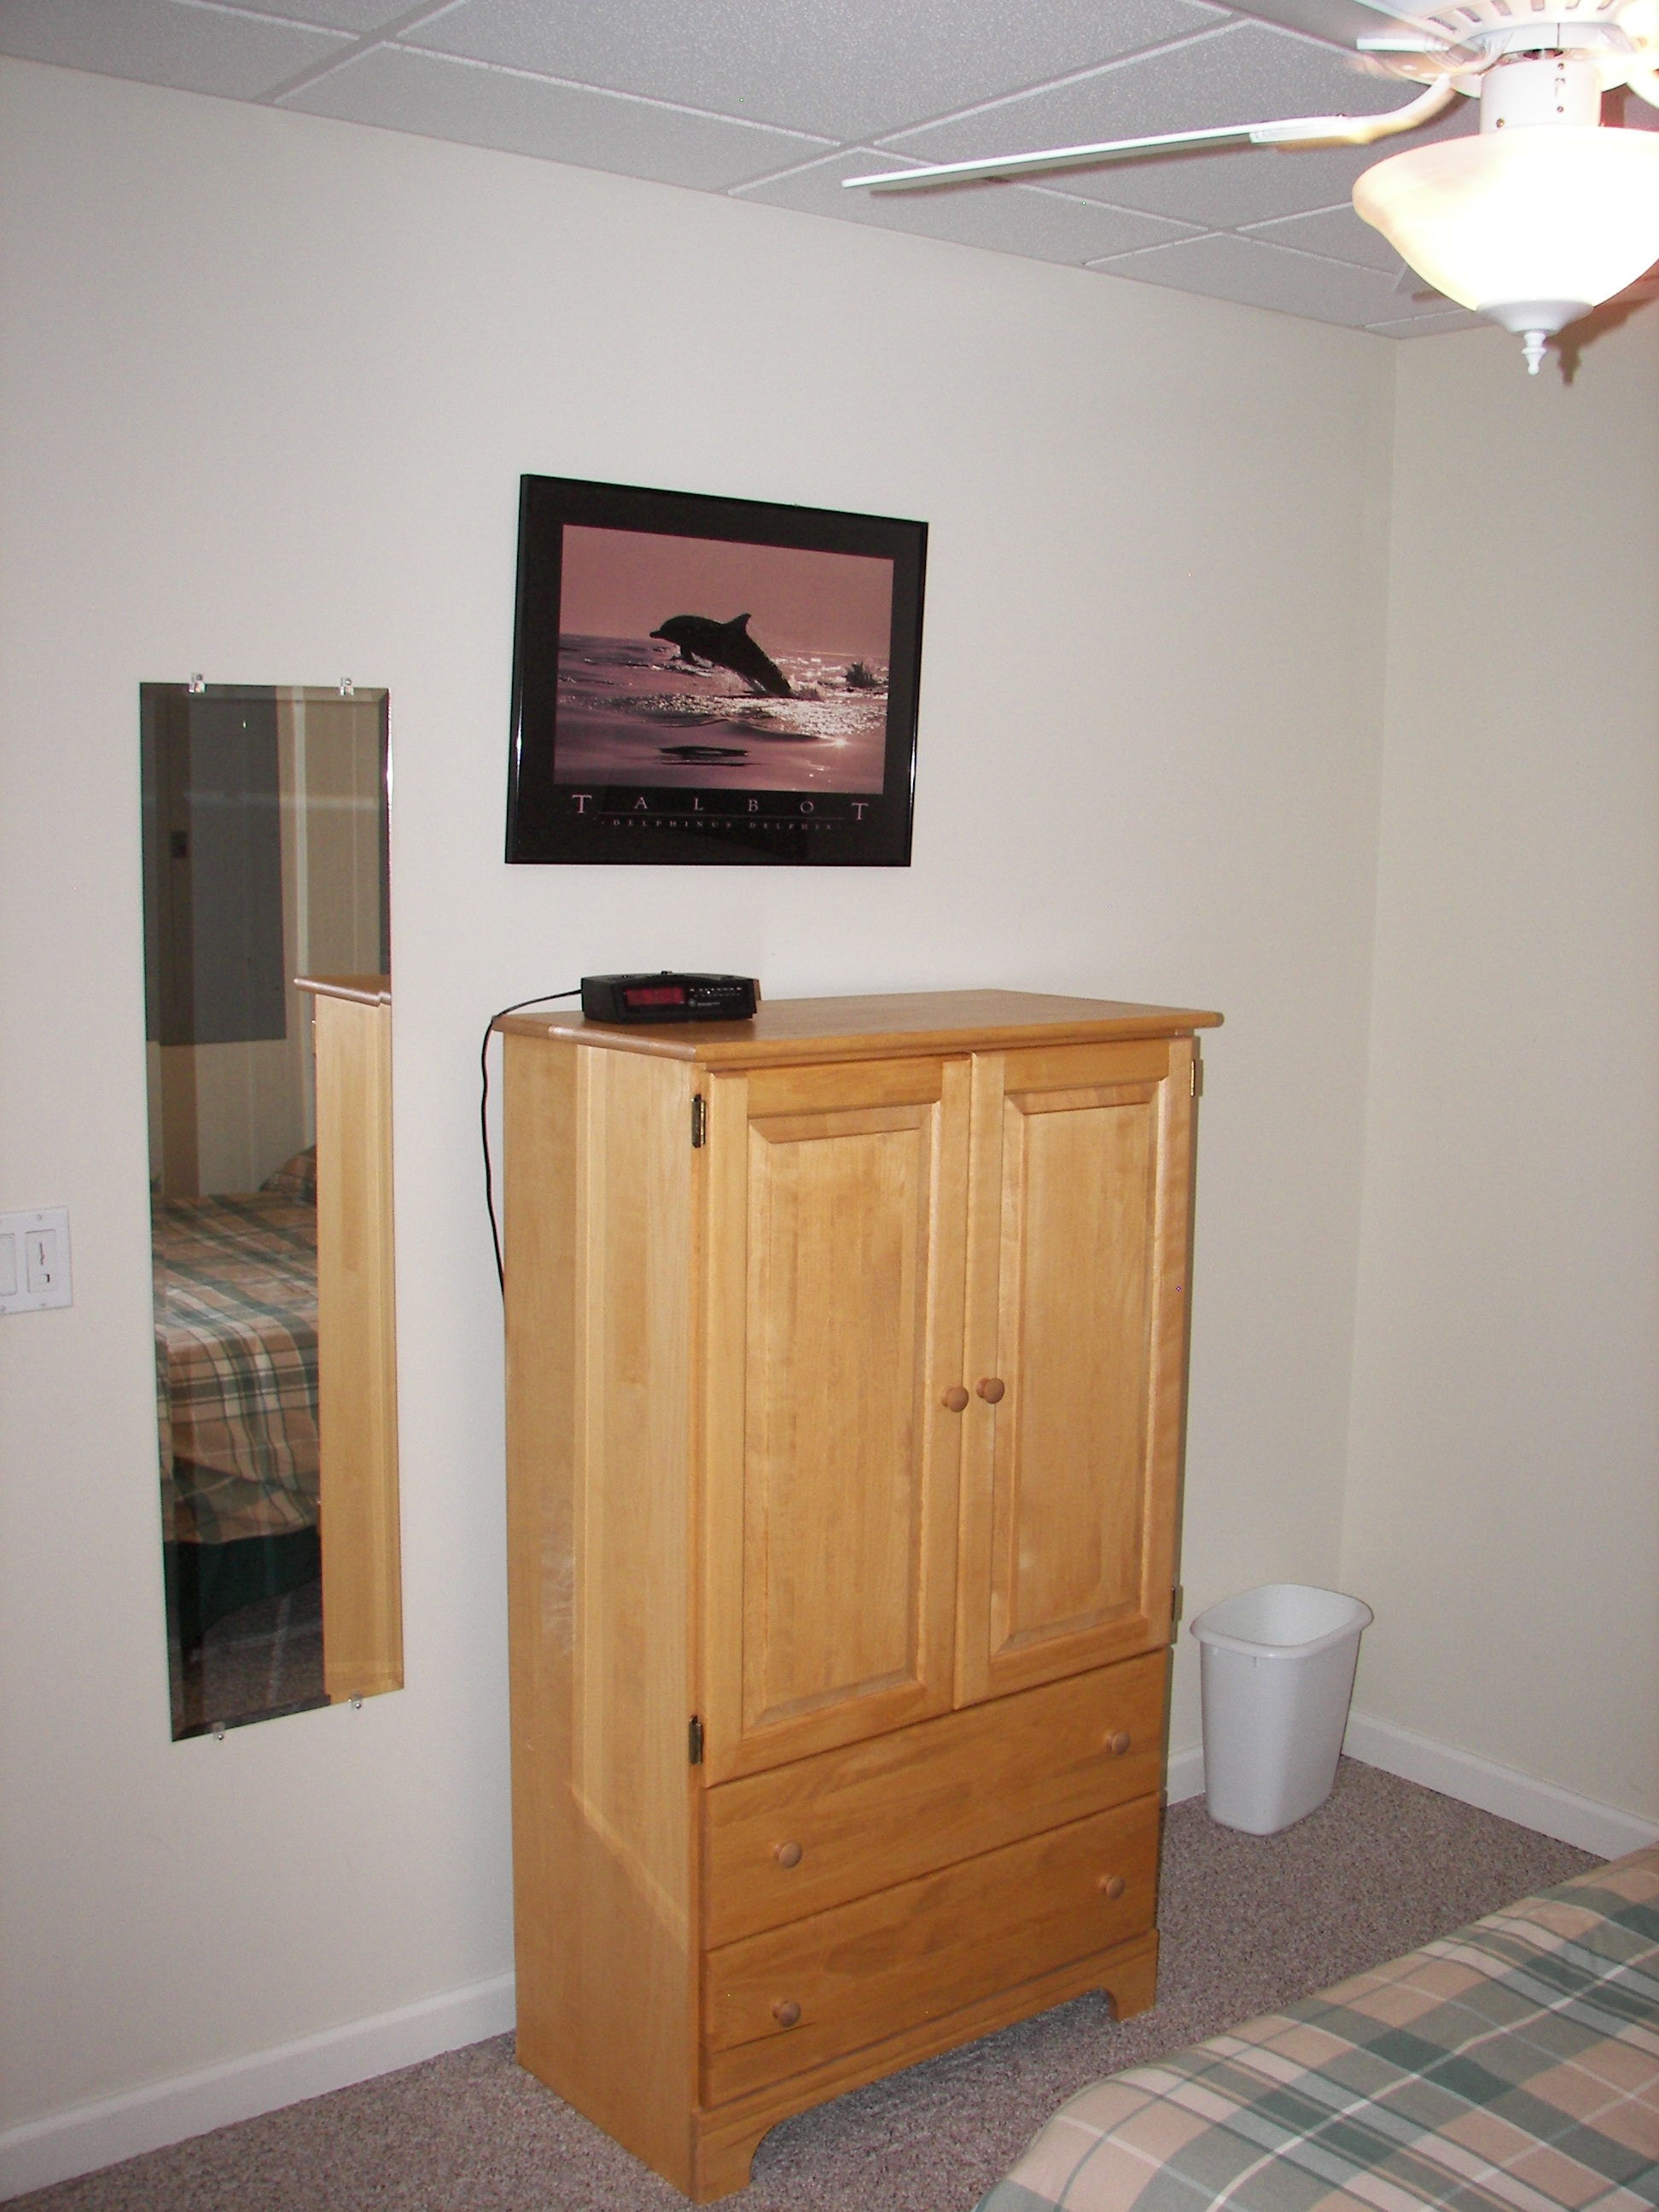 CoC-Updated-Photos/CoC-SurfingBedroomChest.jpg